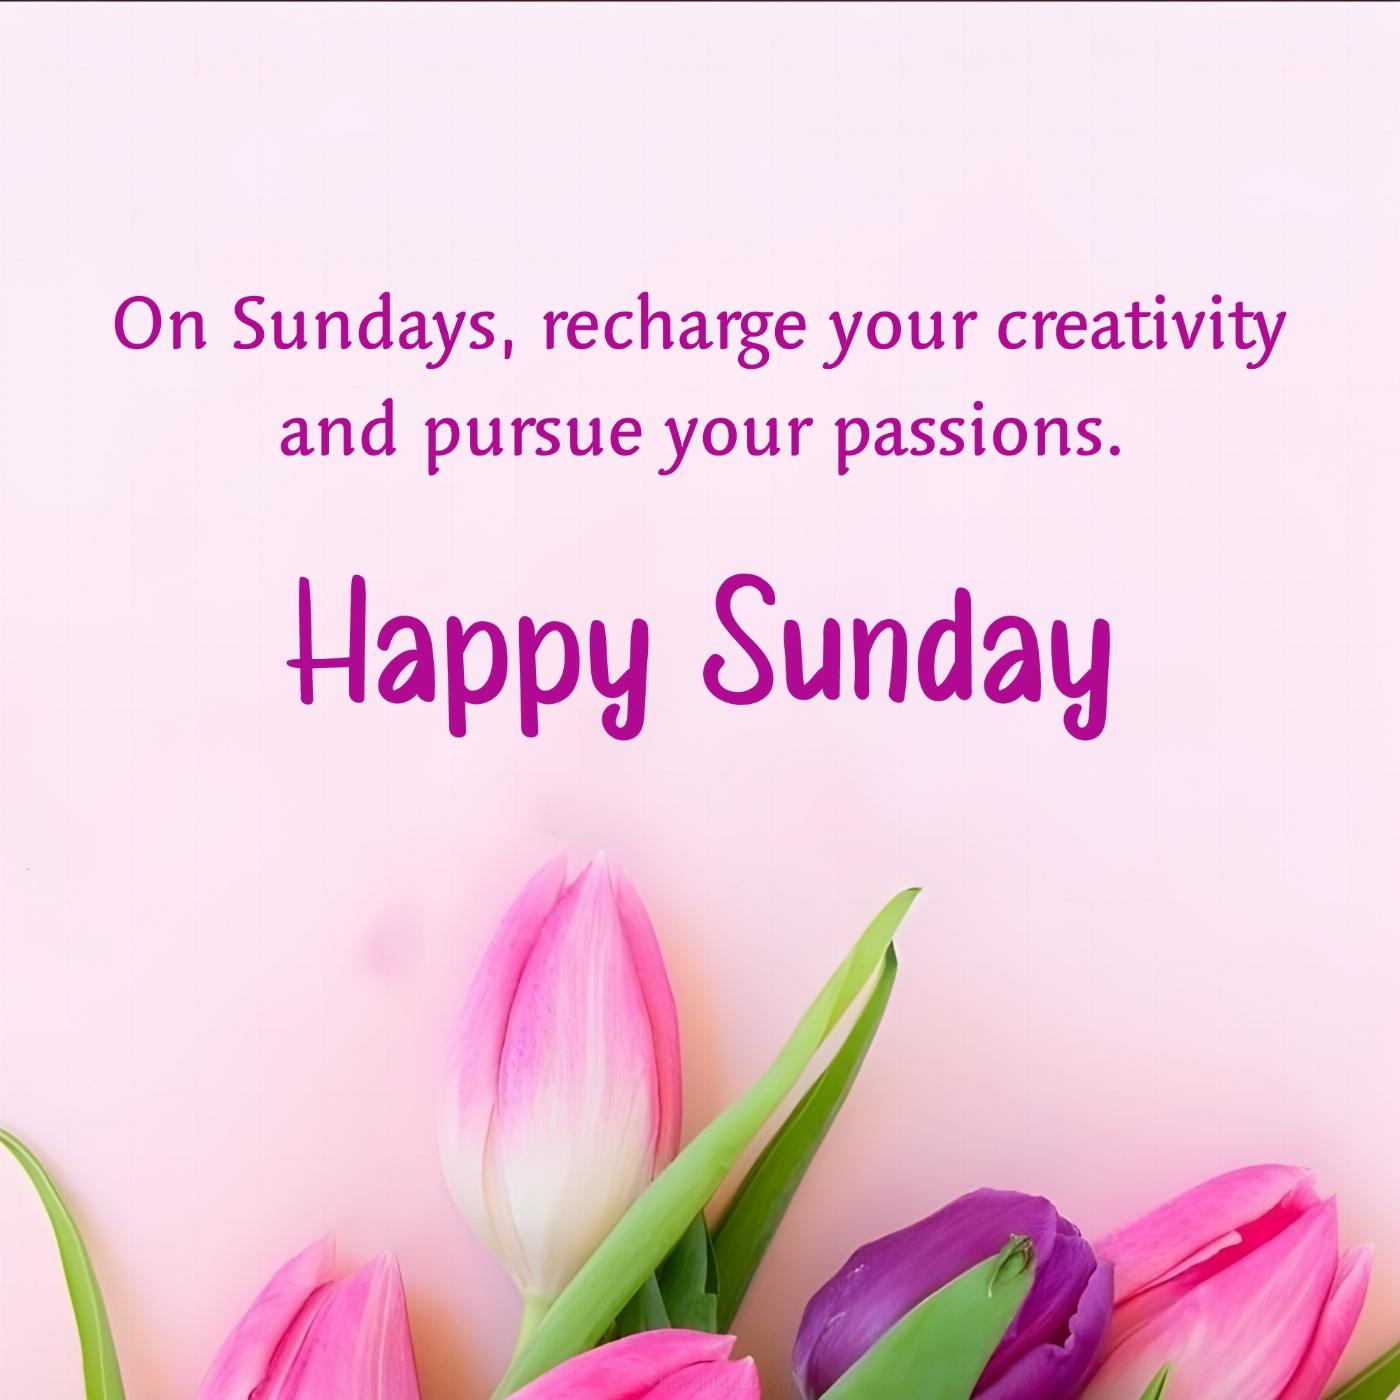 On Sundays recharge your creativity and pursue your passions